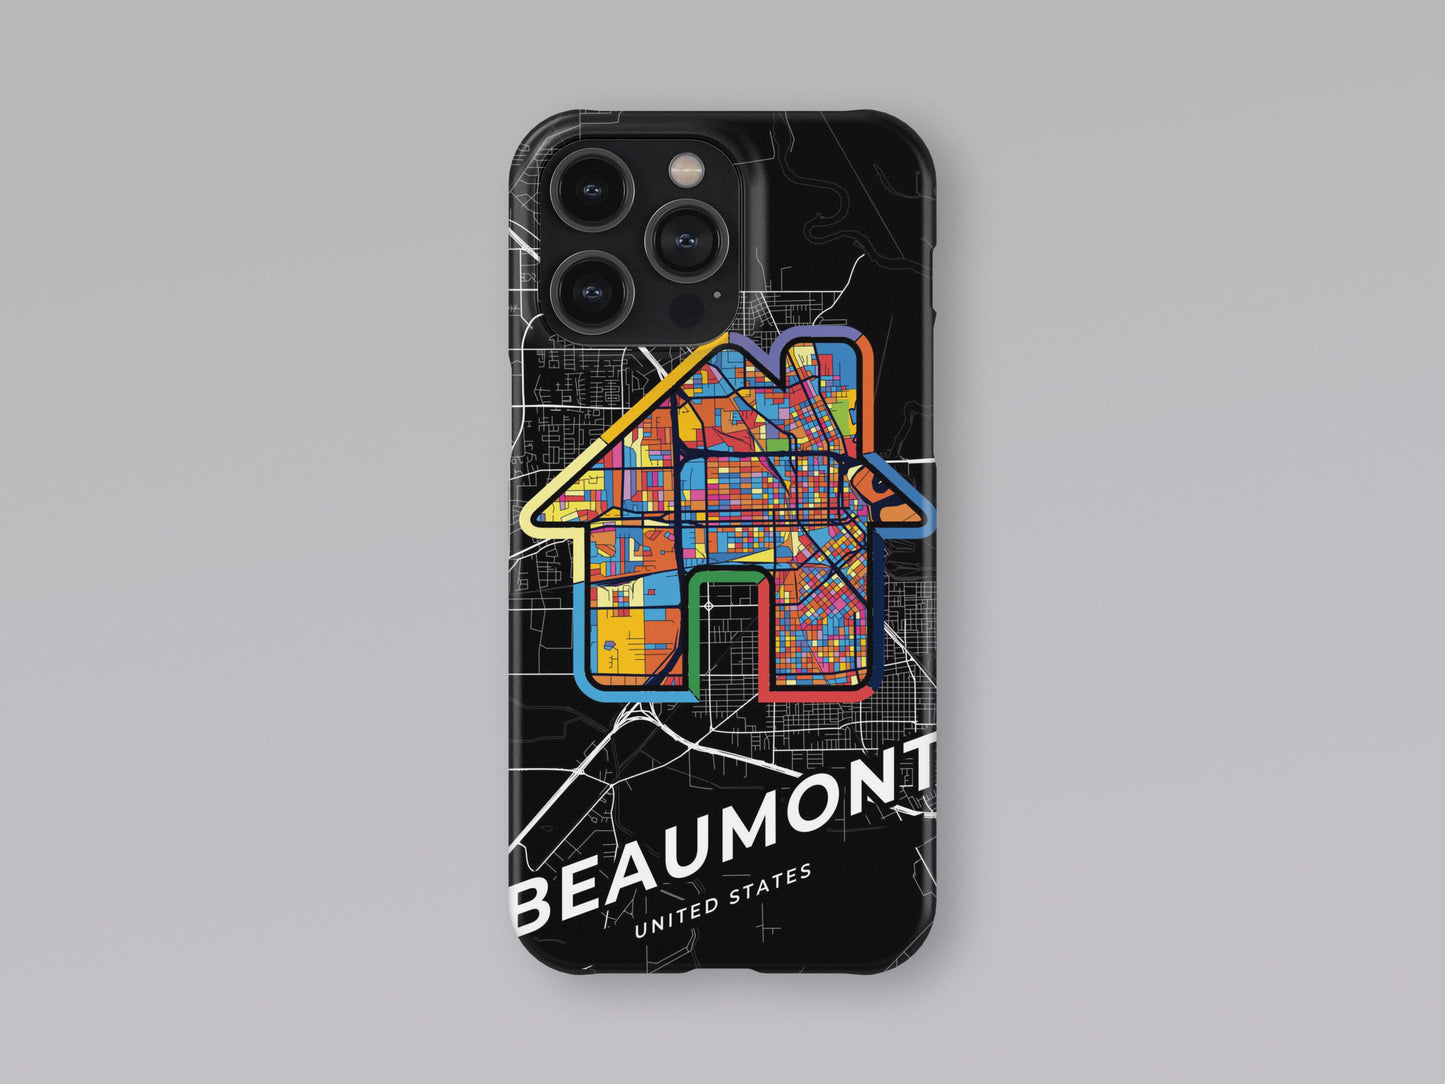 Beaumont Texas slim phone case with colorful icon. Birthday, wedding or housewarming gift. Couple match cases. 3